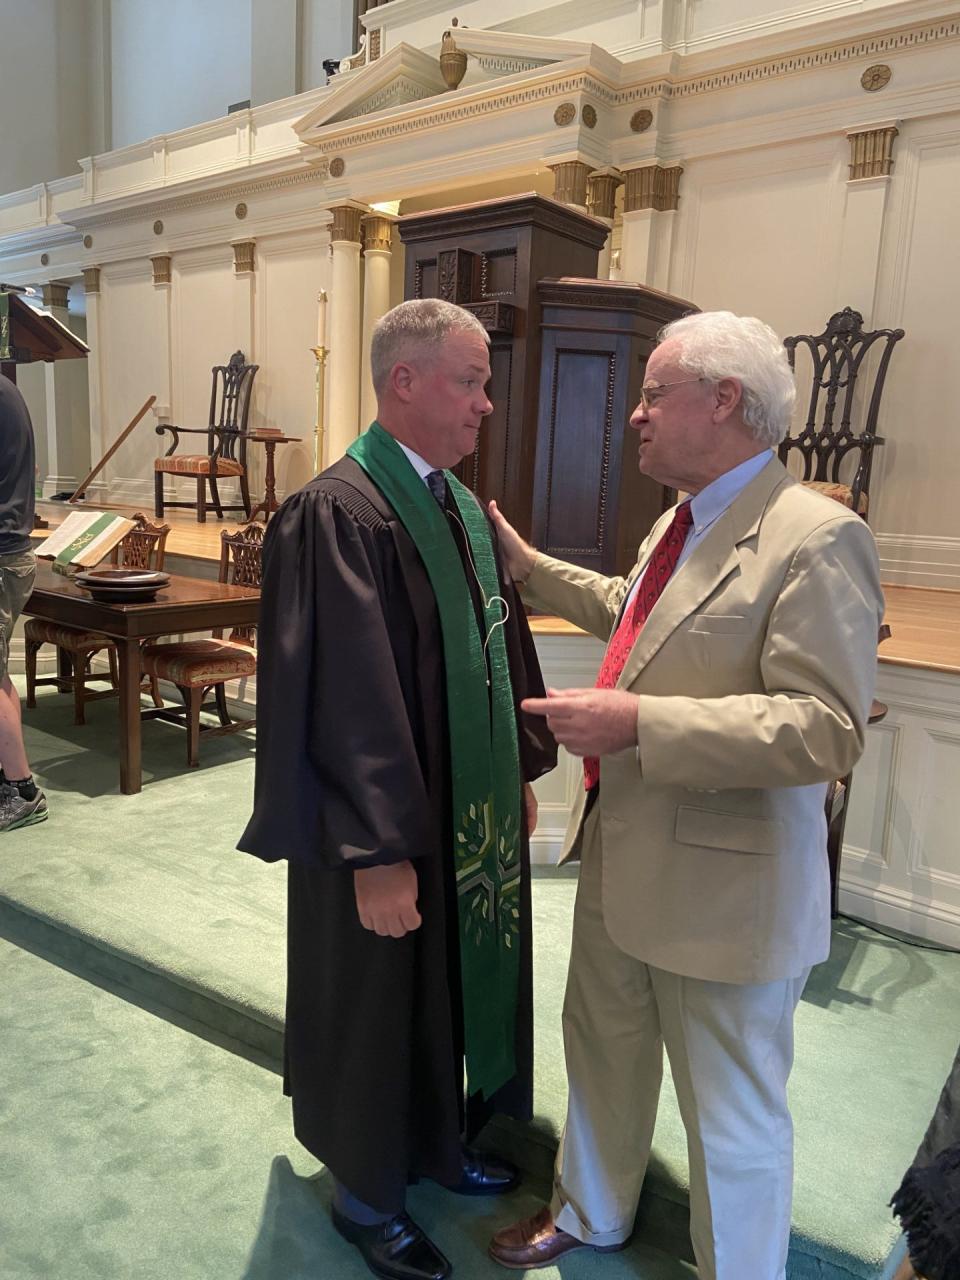 The Rev. Dr. Kyle Reese is congratulated by longtime member J. Curtis Lewis III